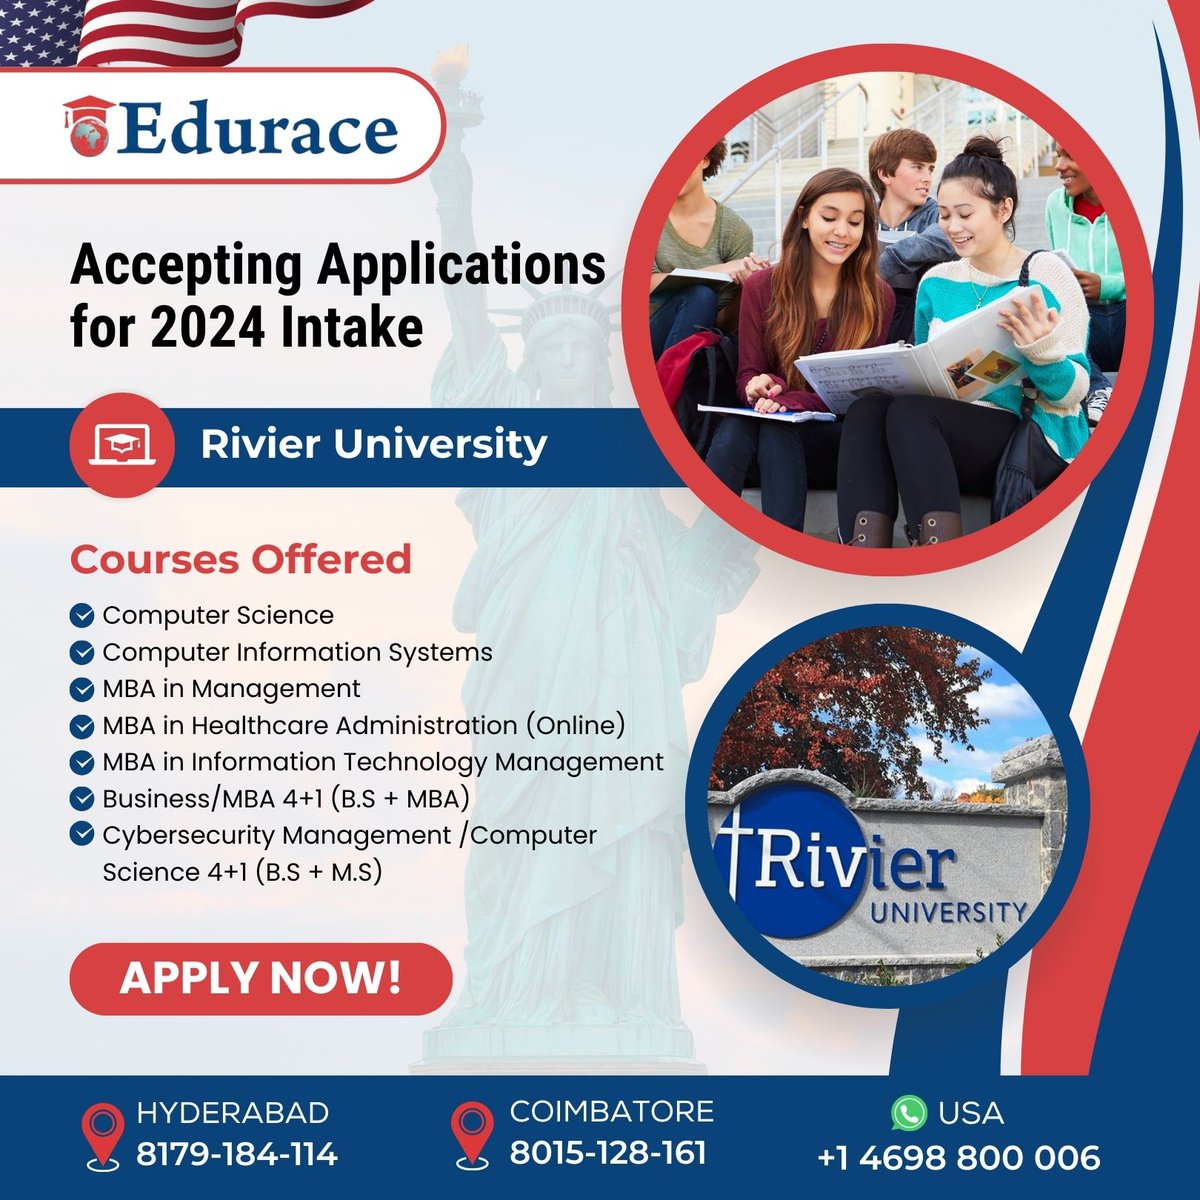 Study in the USA - We're Now Accepting Applications for the Summer 2024 intake at Rivier University.

#eduraceservices #Intake2024 #summer2024 #studyinusa #usa #usaeducationconsultants #Hyderabad #usauniversities #mba #rivieruniversity #msinusa #masters #studyabroad